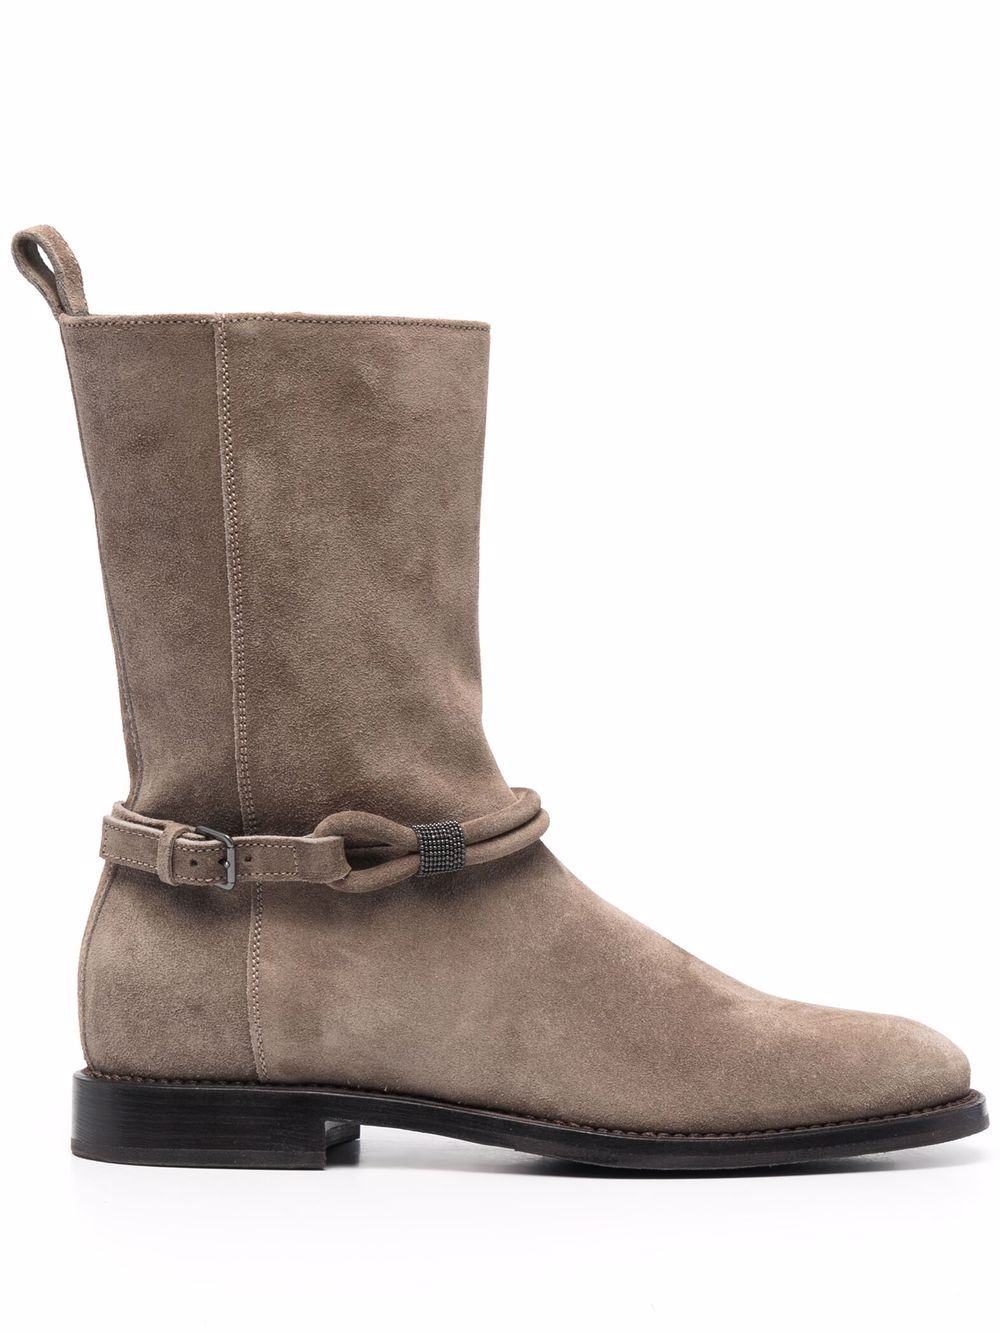 Letaher Ankle Boots дамски обувки Brunello Cucinelli 848895797_36